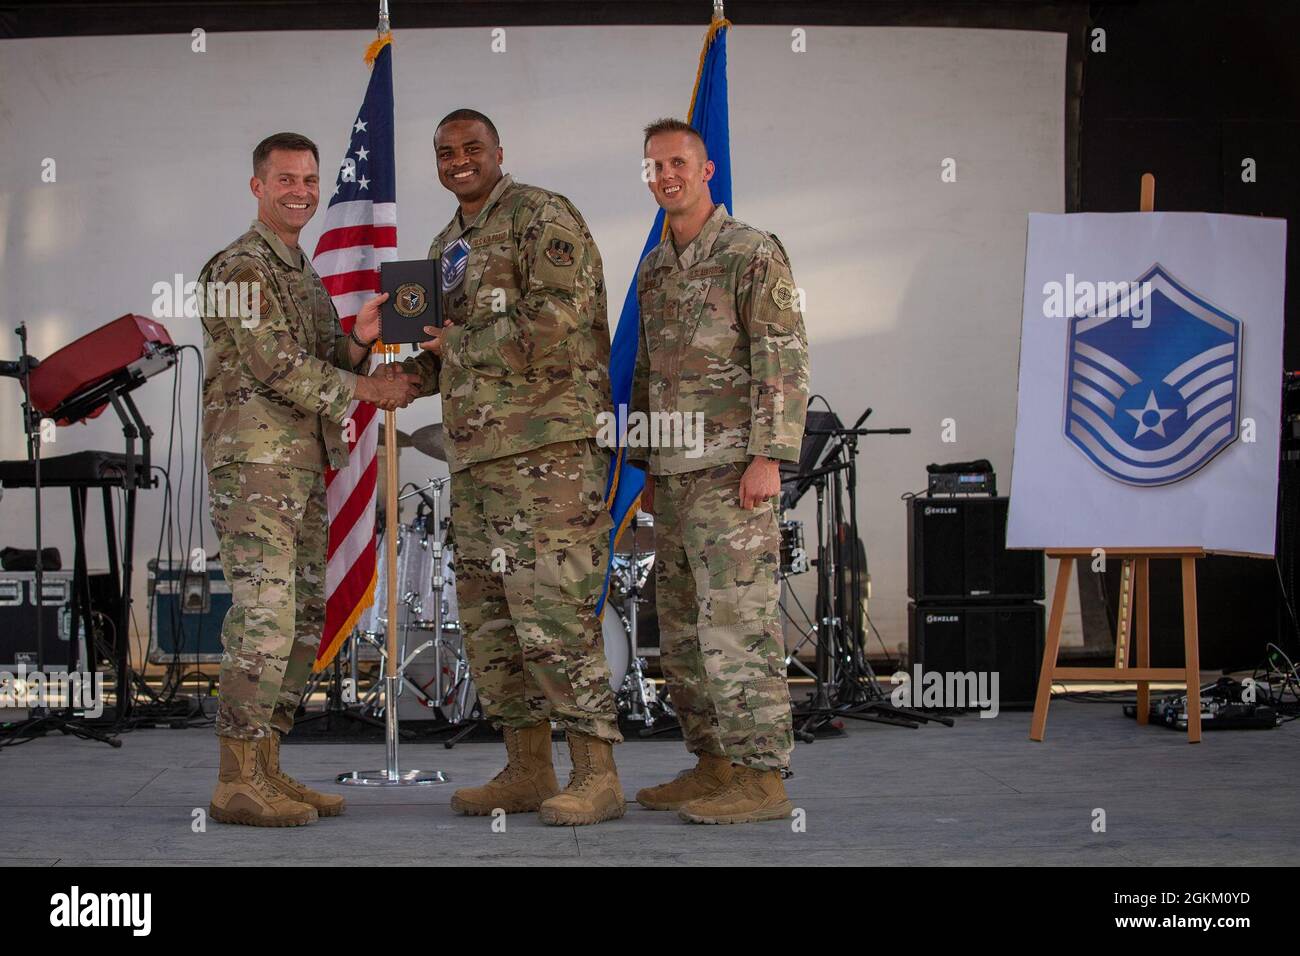 U.S. Air Force Brig. Gen. Larry R. Broadwell, 380th Air Expeditionary Wing commander (AEW), and Chief Master Sgt. Joshua J. Wiener, 380th AEW command chief, pose with Tech. Sgt. Lewis Hampton, 380th Expeditionary Contracting Squadron, at Al Dhafra Air Base (ADAB), United Arab Emirates, May 21, 2021. Hampton is one of 19 team ADAB technical sergeants that were selected for promoted to master sergeant this year. Stock Photo